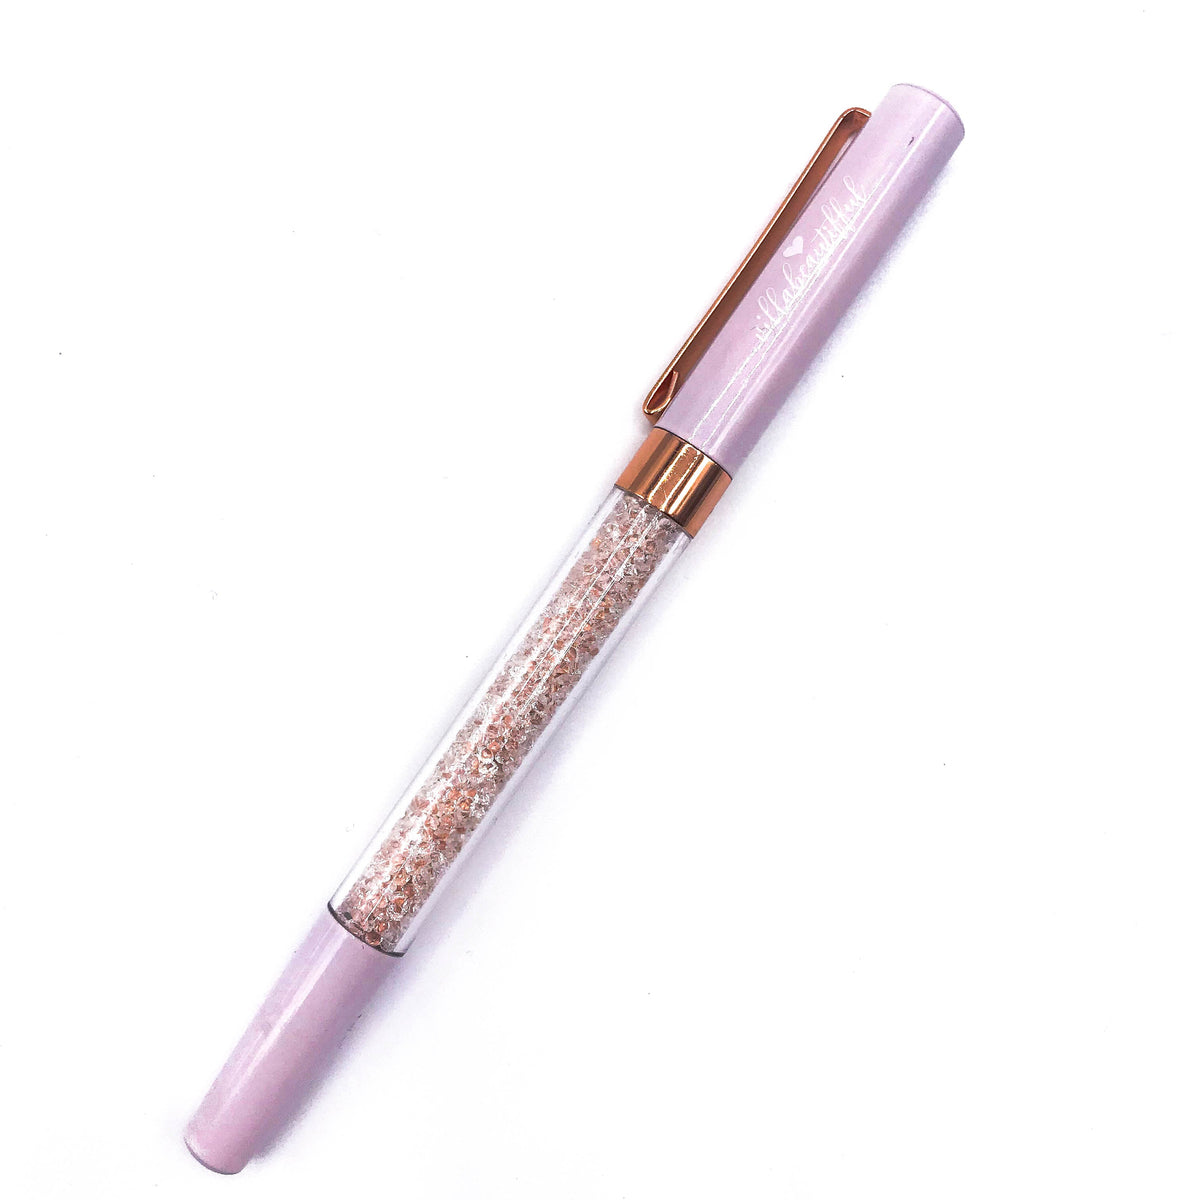 Pink Me Up Imperfect Crystal VBPen | limited